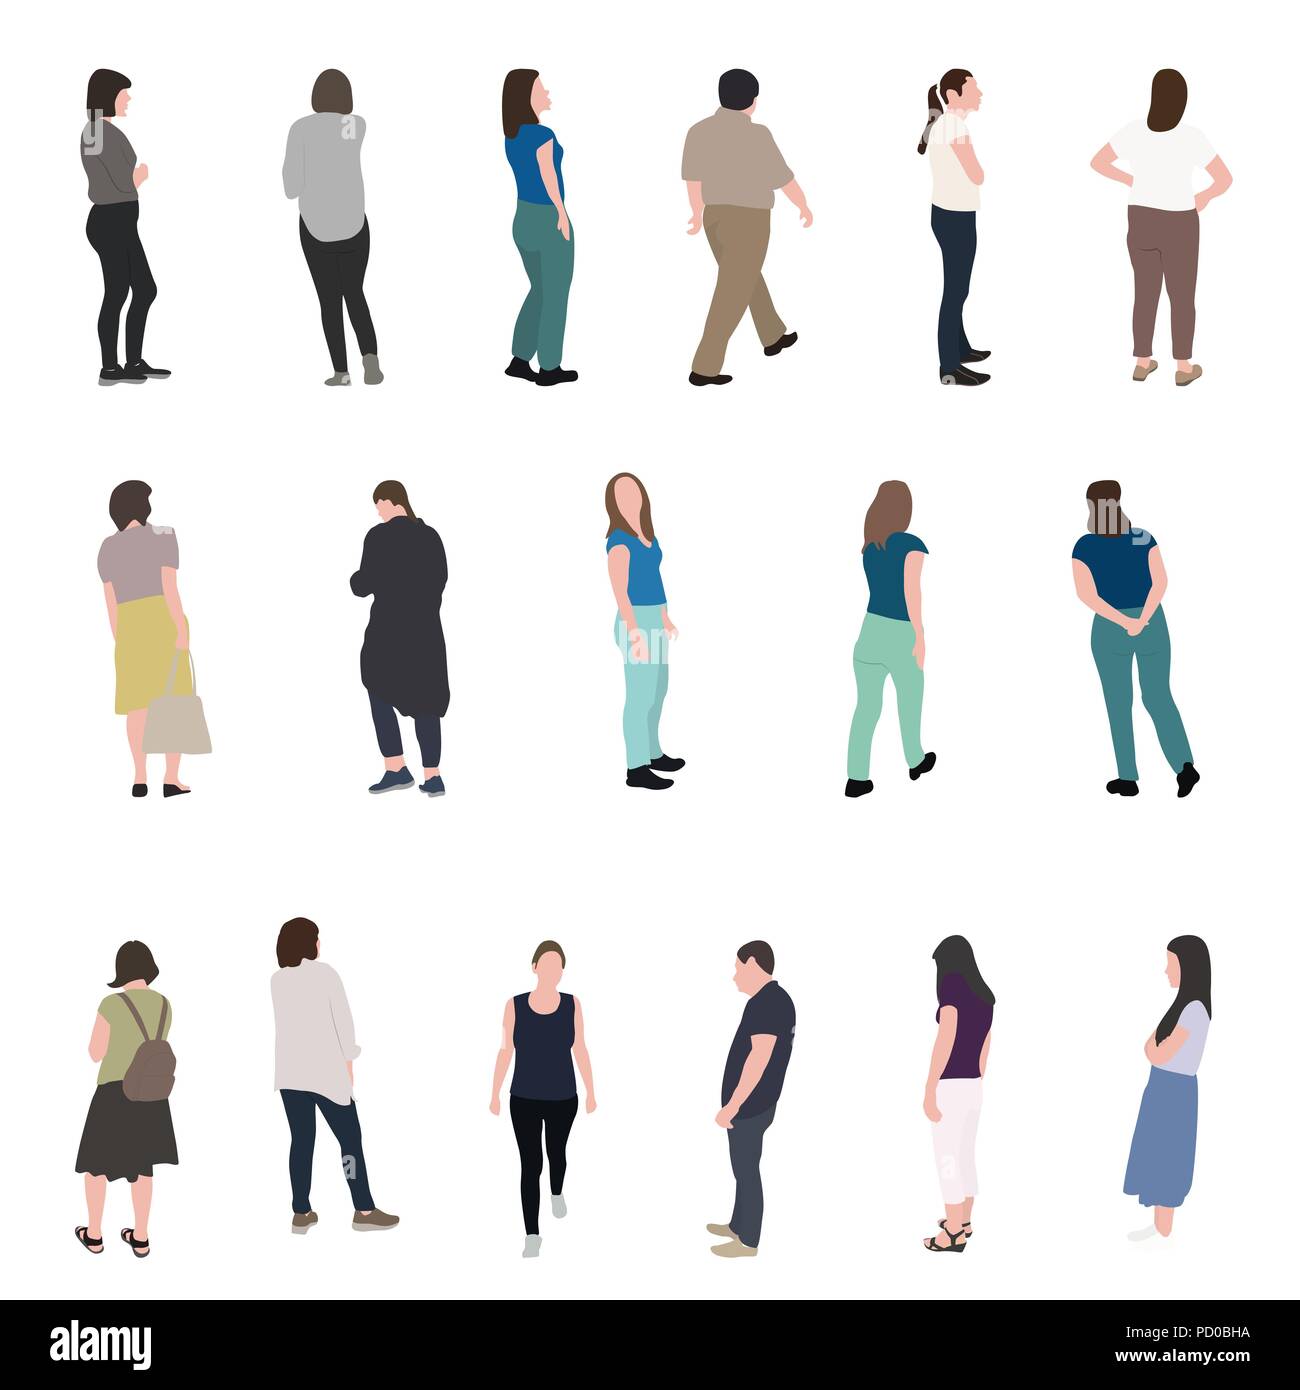 Set of Silhouette Walking People. Vector Illustration Stock Vector